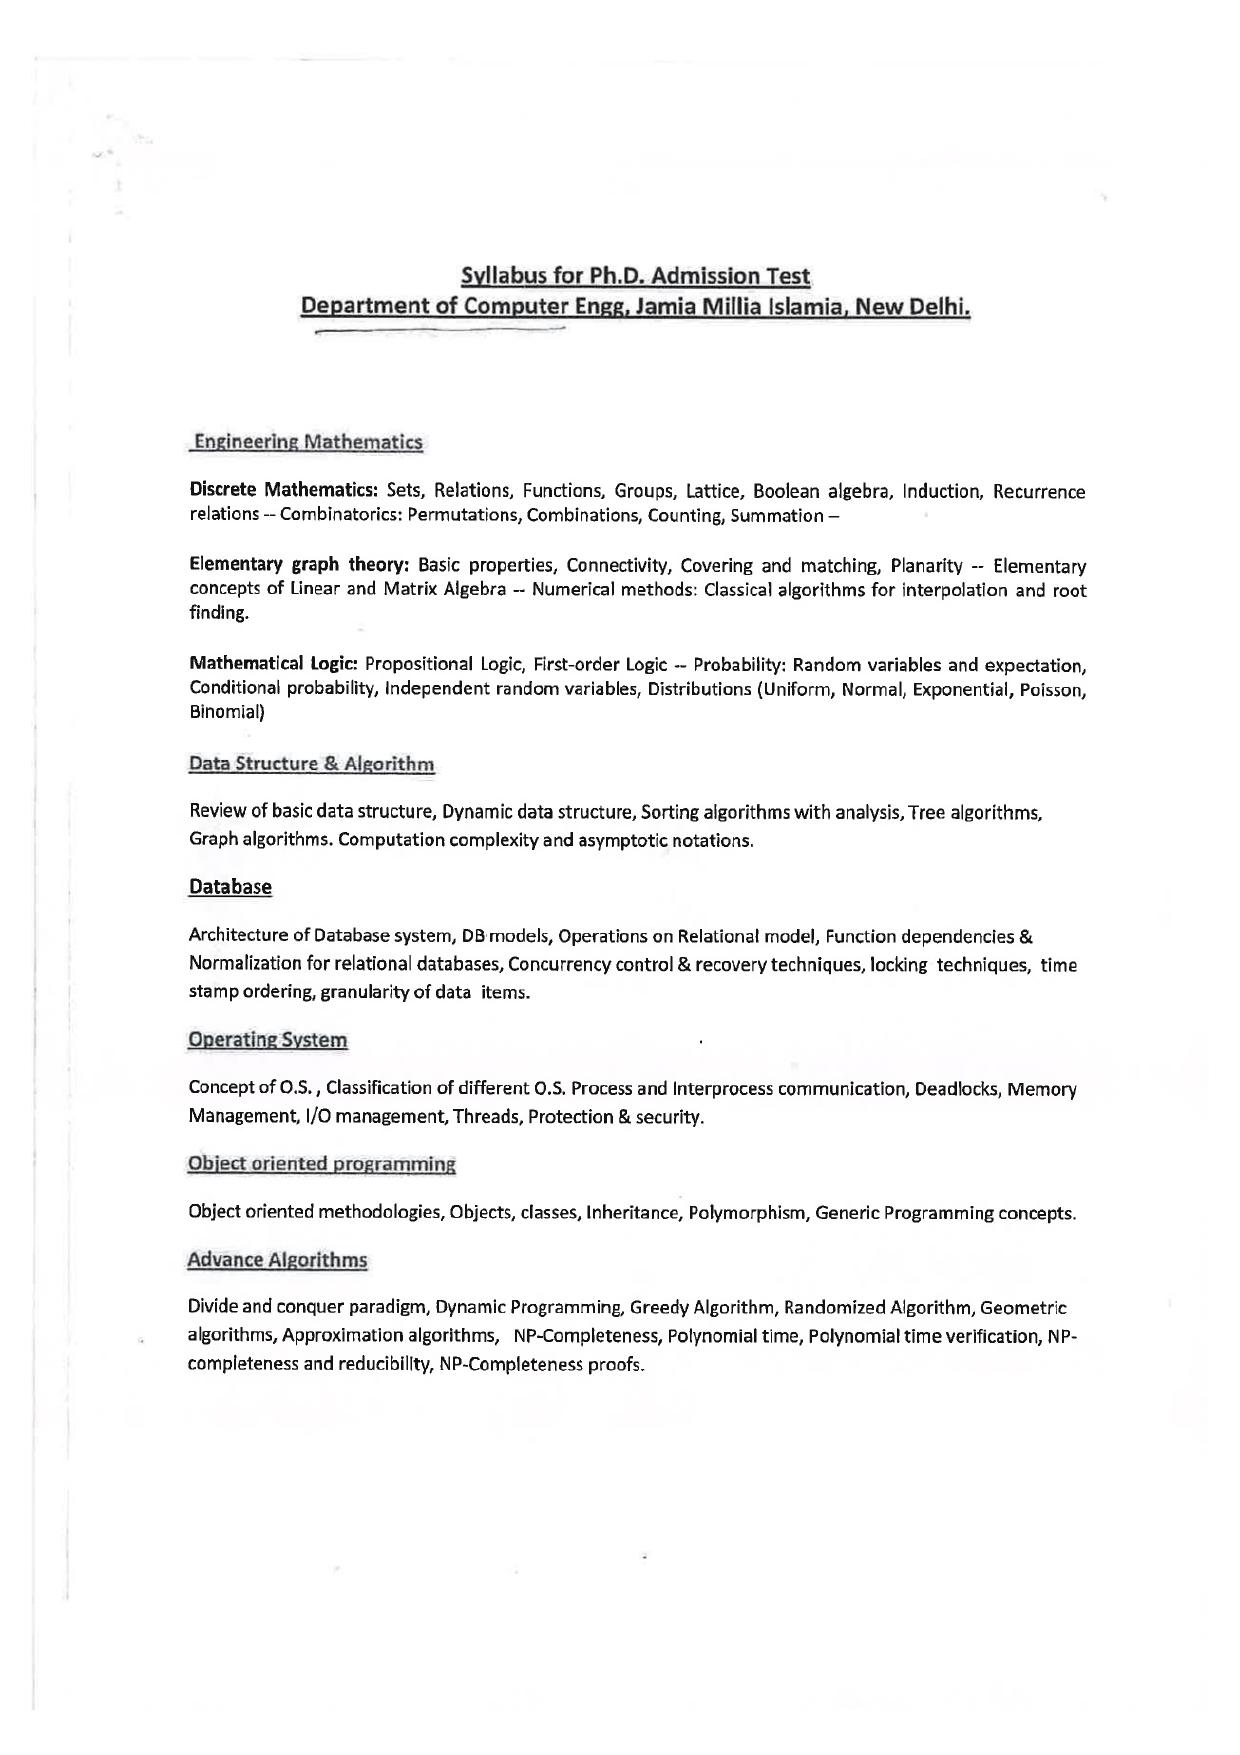 JMI Entrance Exam FACULTY OF ENGINEERING & TECHNOLOGY Syllabus - Page 12